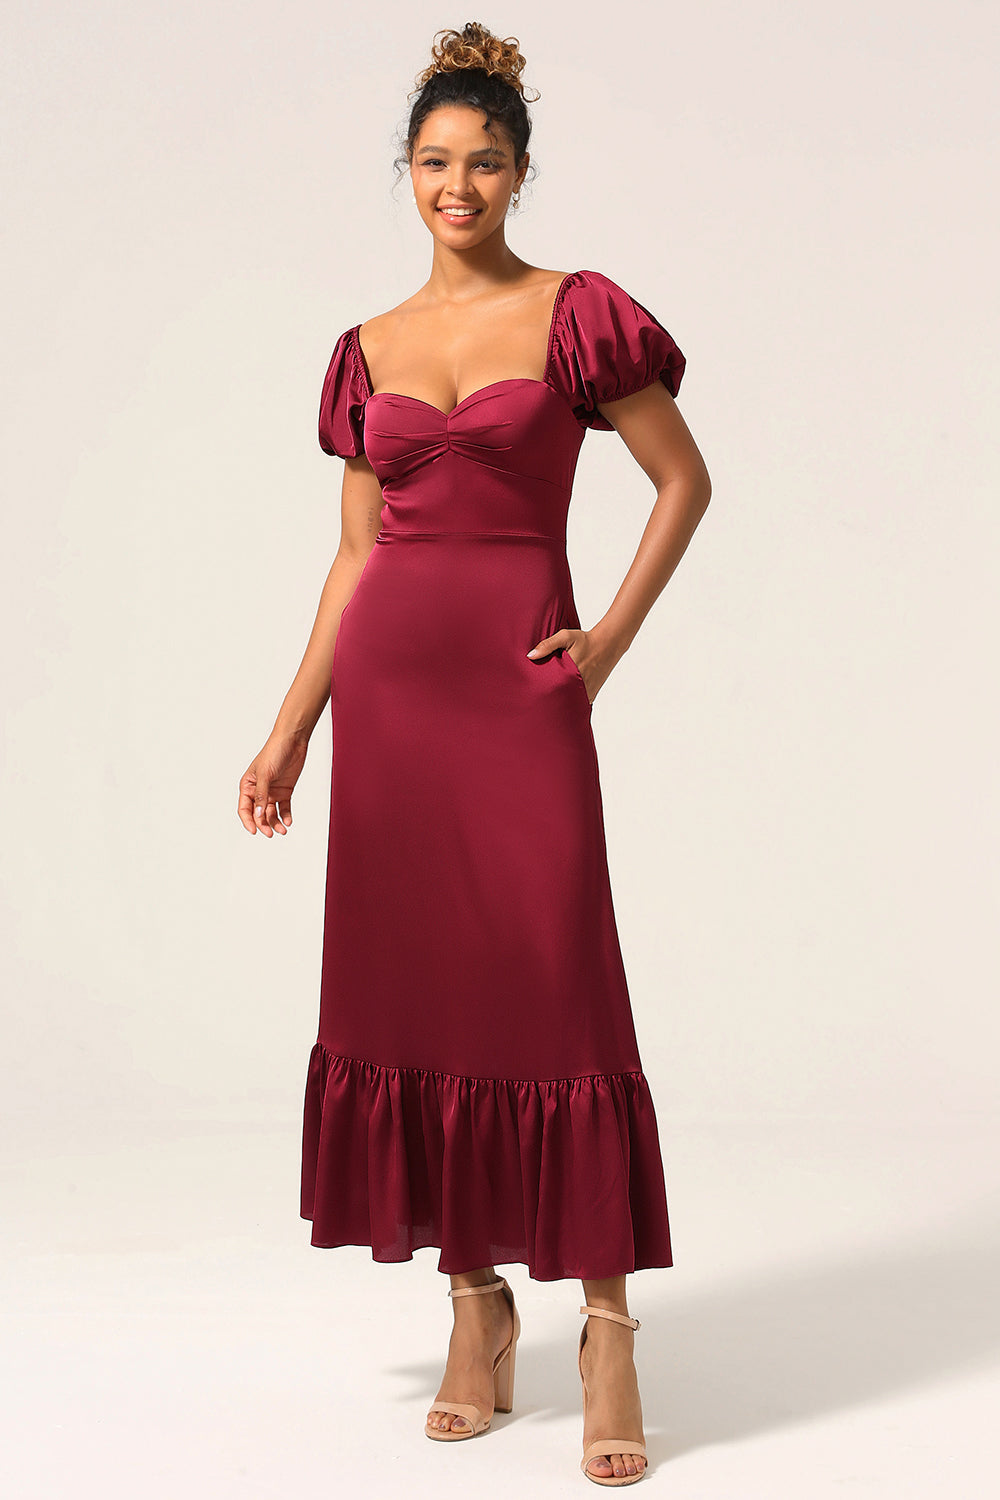 Sweetheart Burgundy Bridesmaid Dress with Puff Sleeves